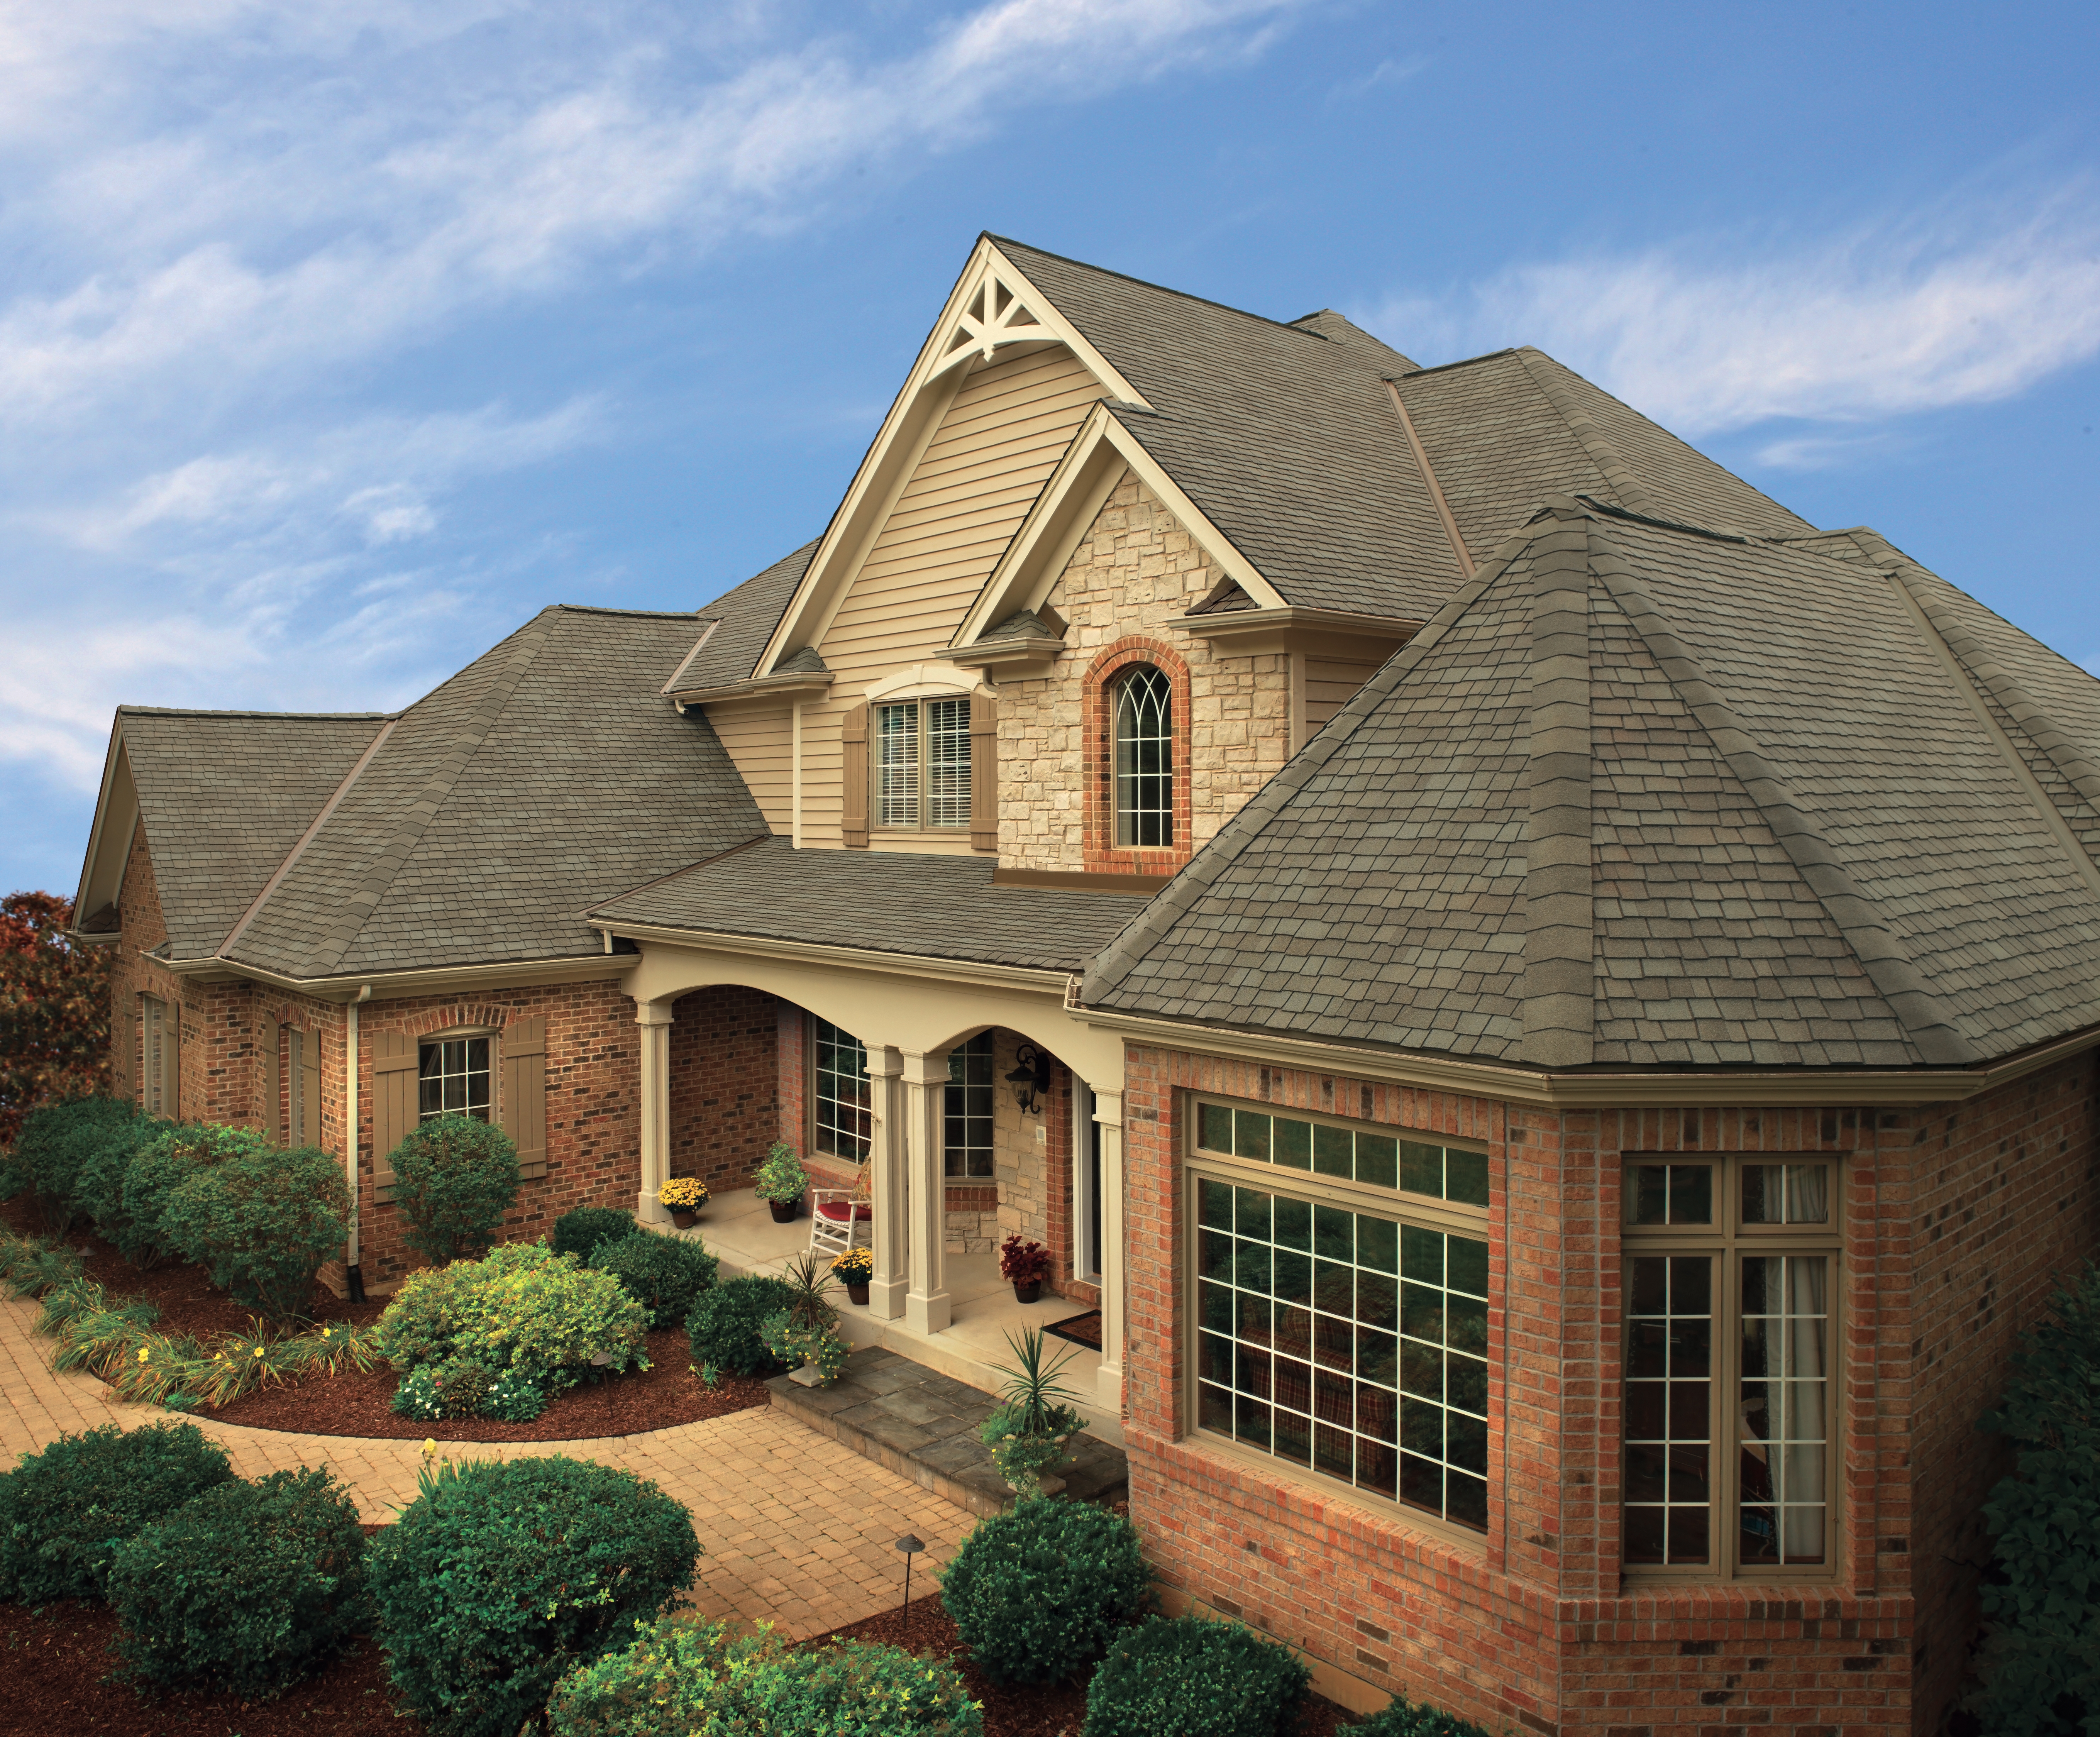 Dark gray roofing shingles against a light red brick exterior